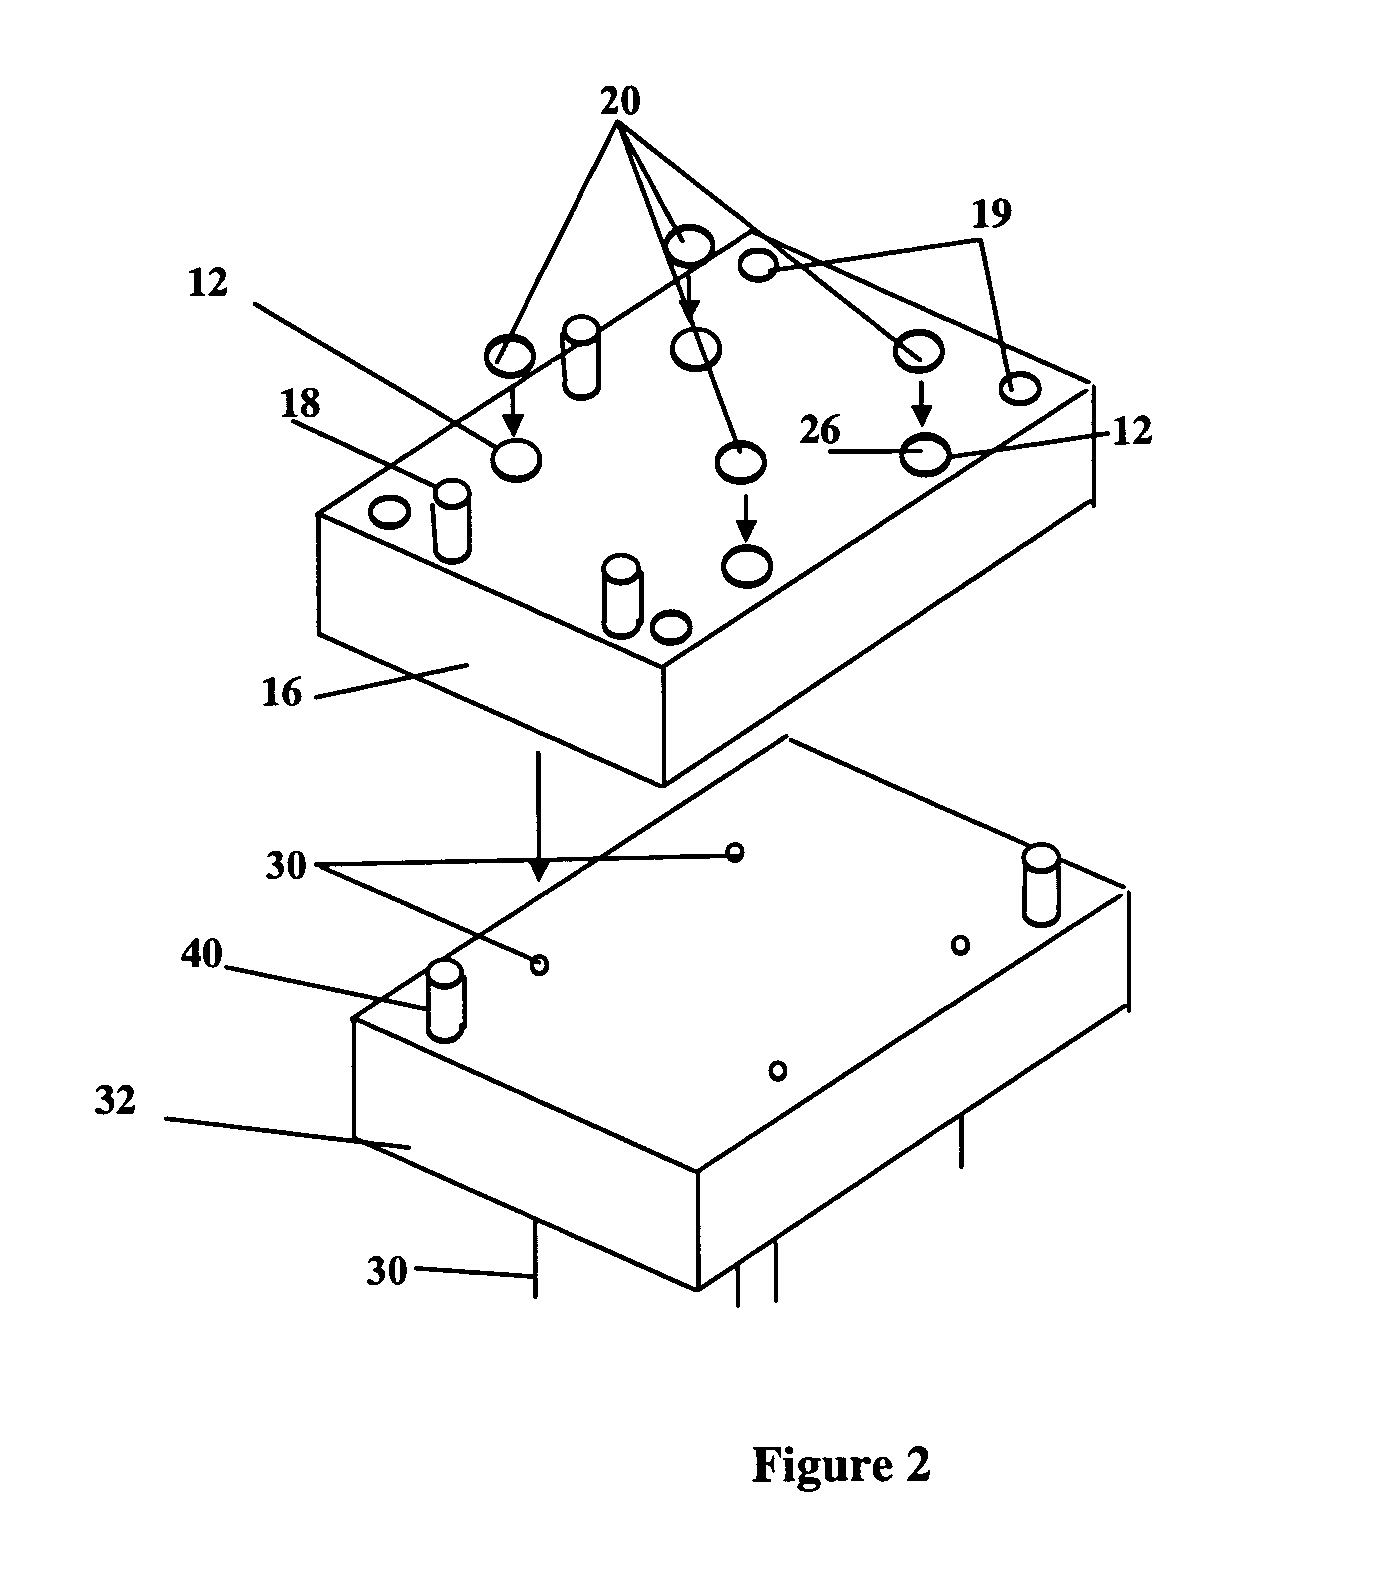 System and method for bonding and debonding a workpiece to a manufacturing fixture